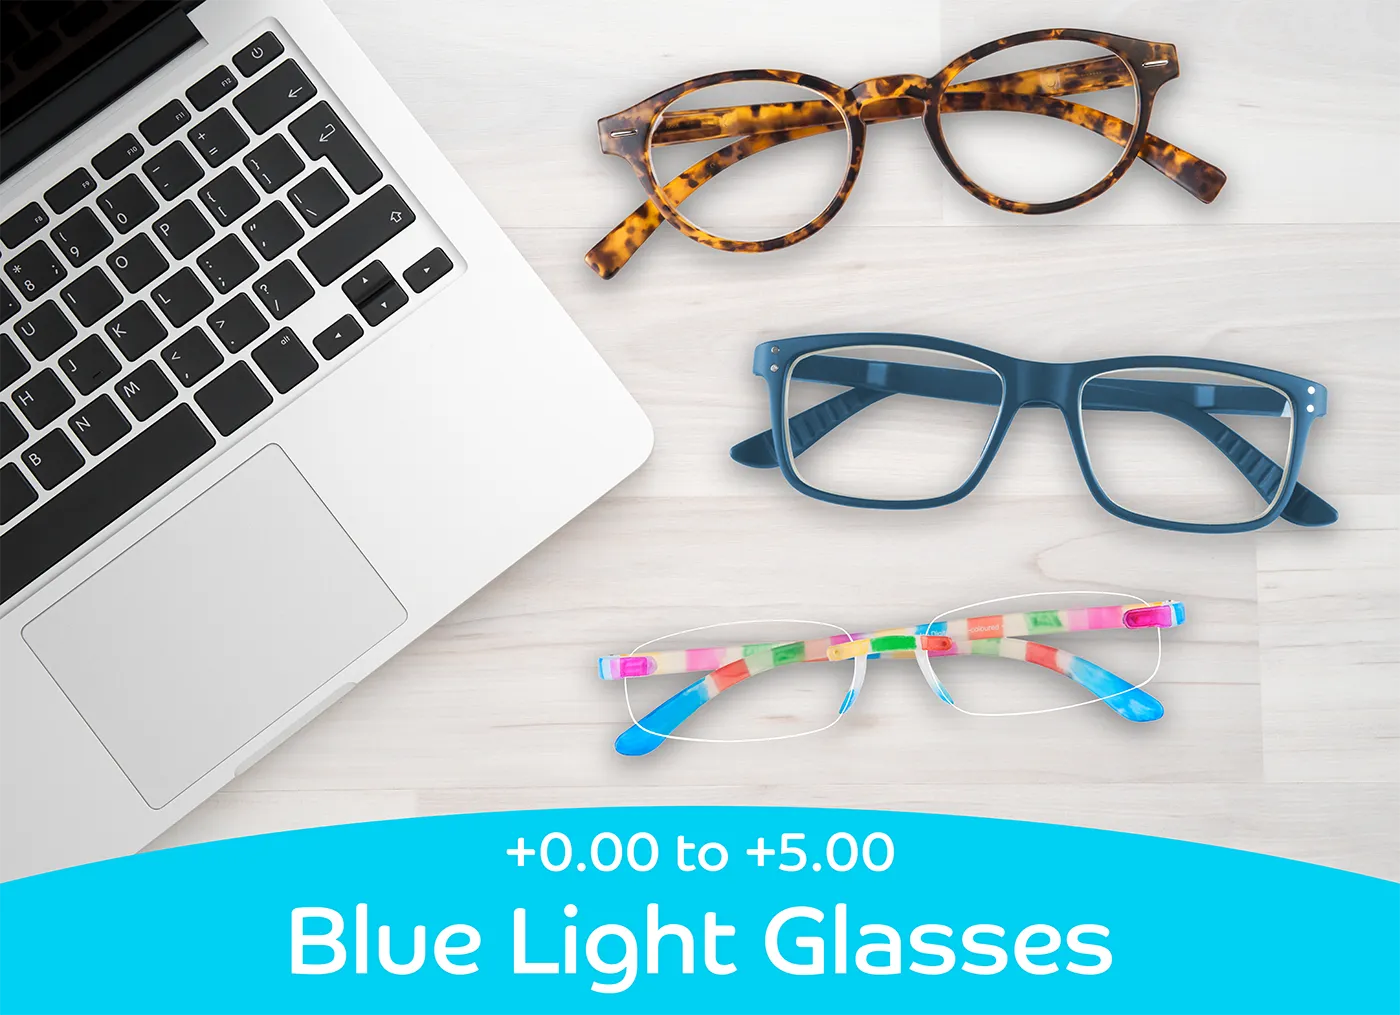 Blue light reading glasses range, available in strengths from +0.00 up to +5.00. Filter blue light from screens and reduce eye strain.